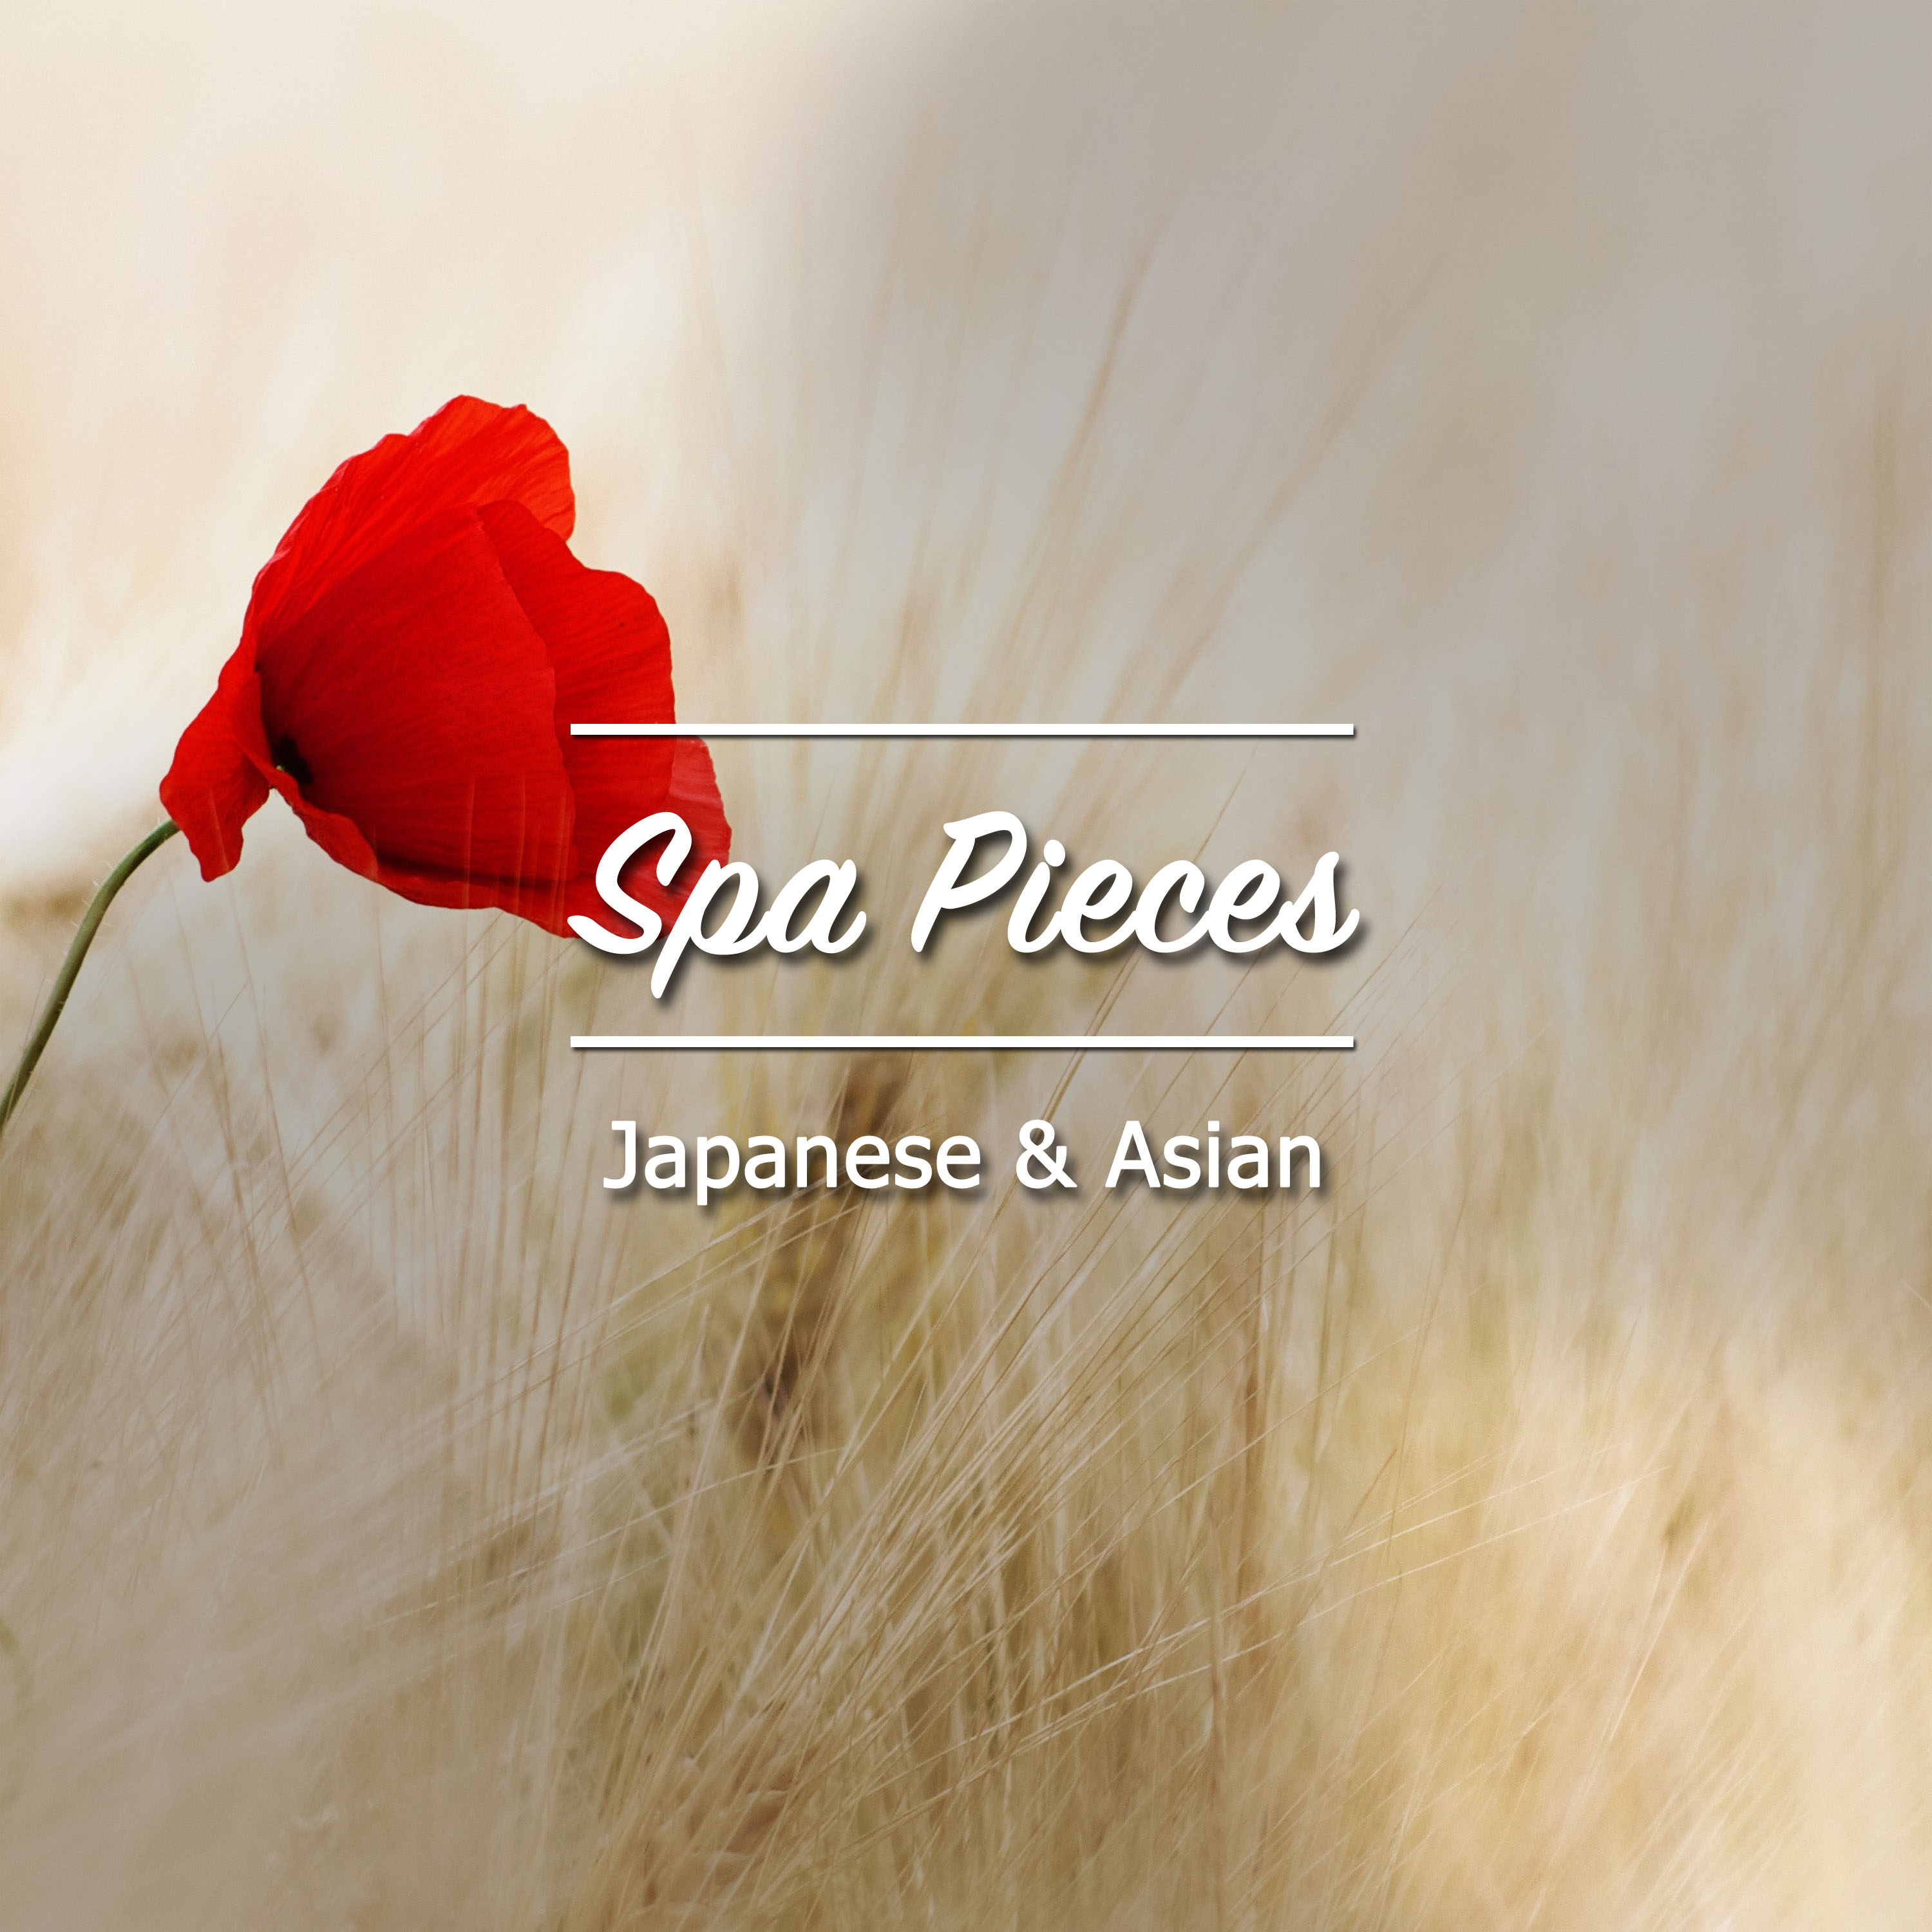 12 Japanese and Asian Spa Pieces